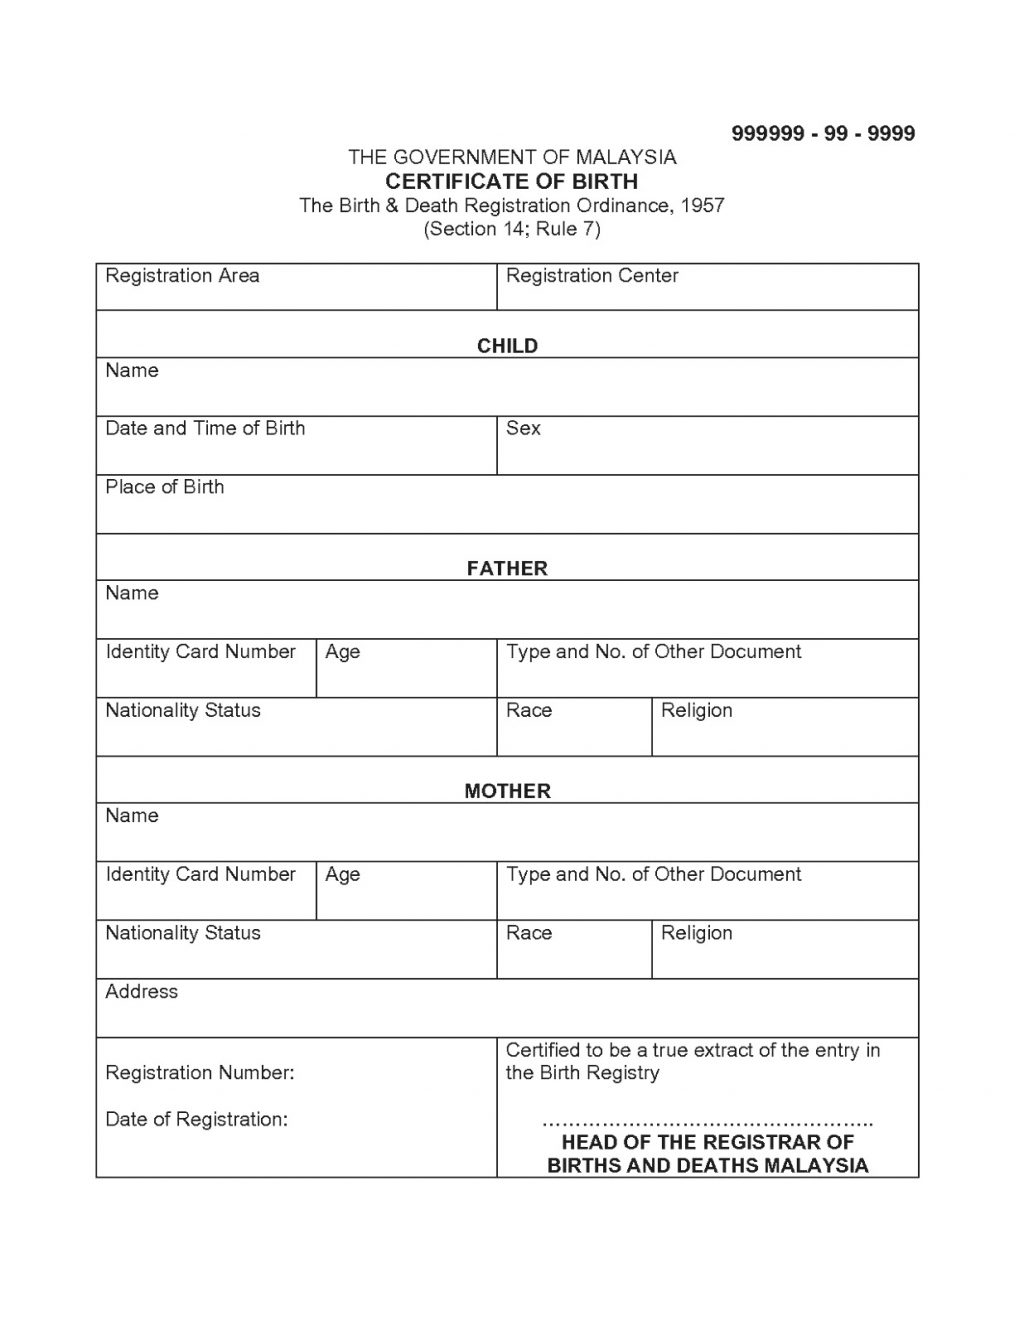 Death Certificate Translation Template Spanish To English Within Mexican Birth Certificate Translation Template